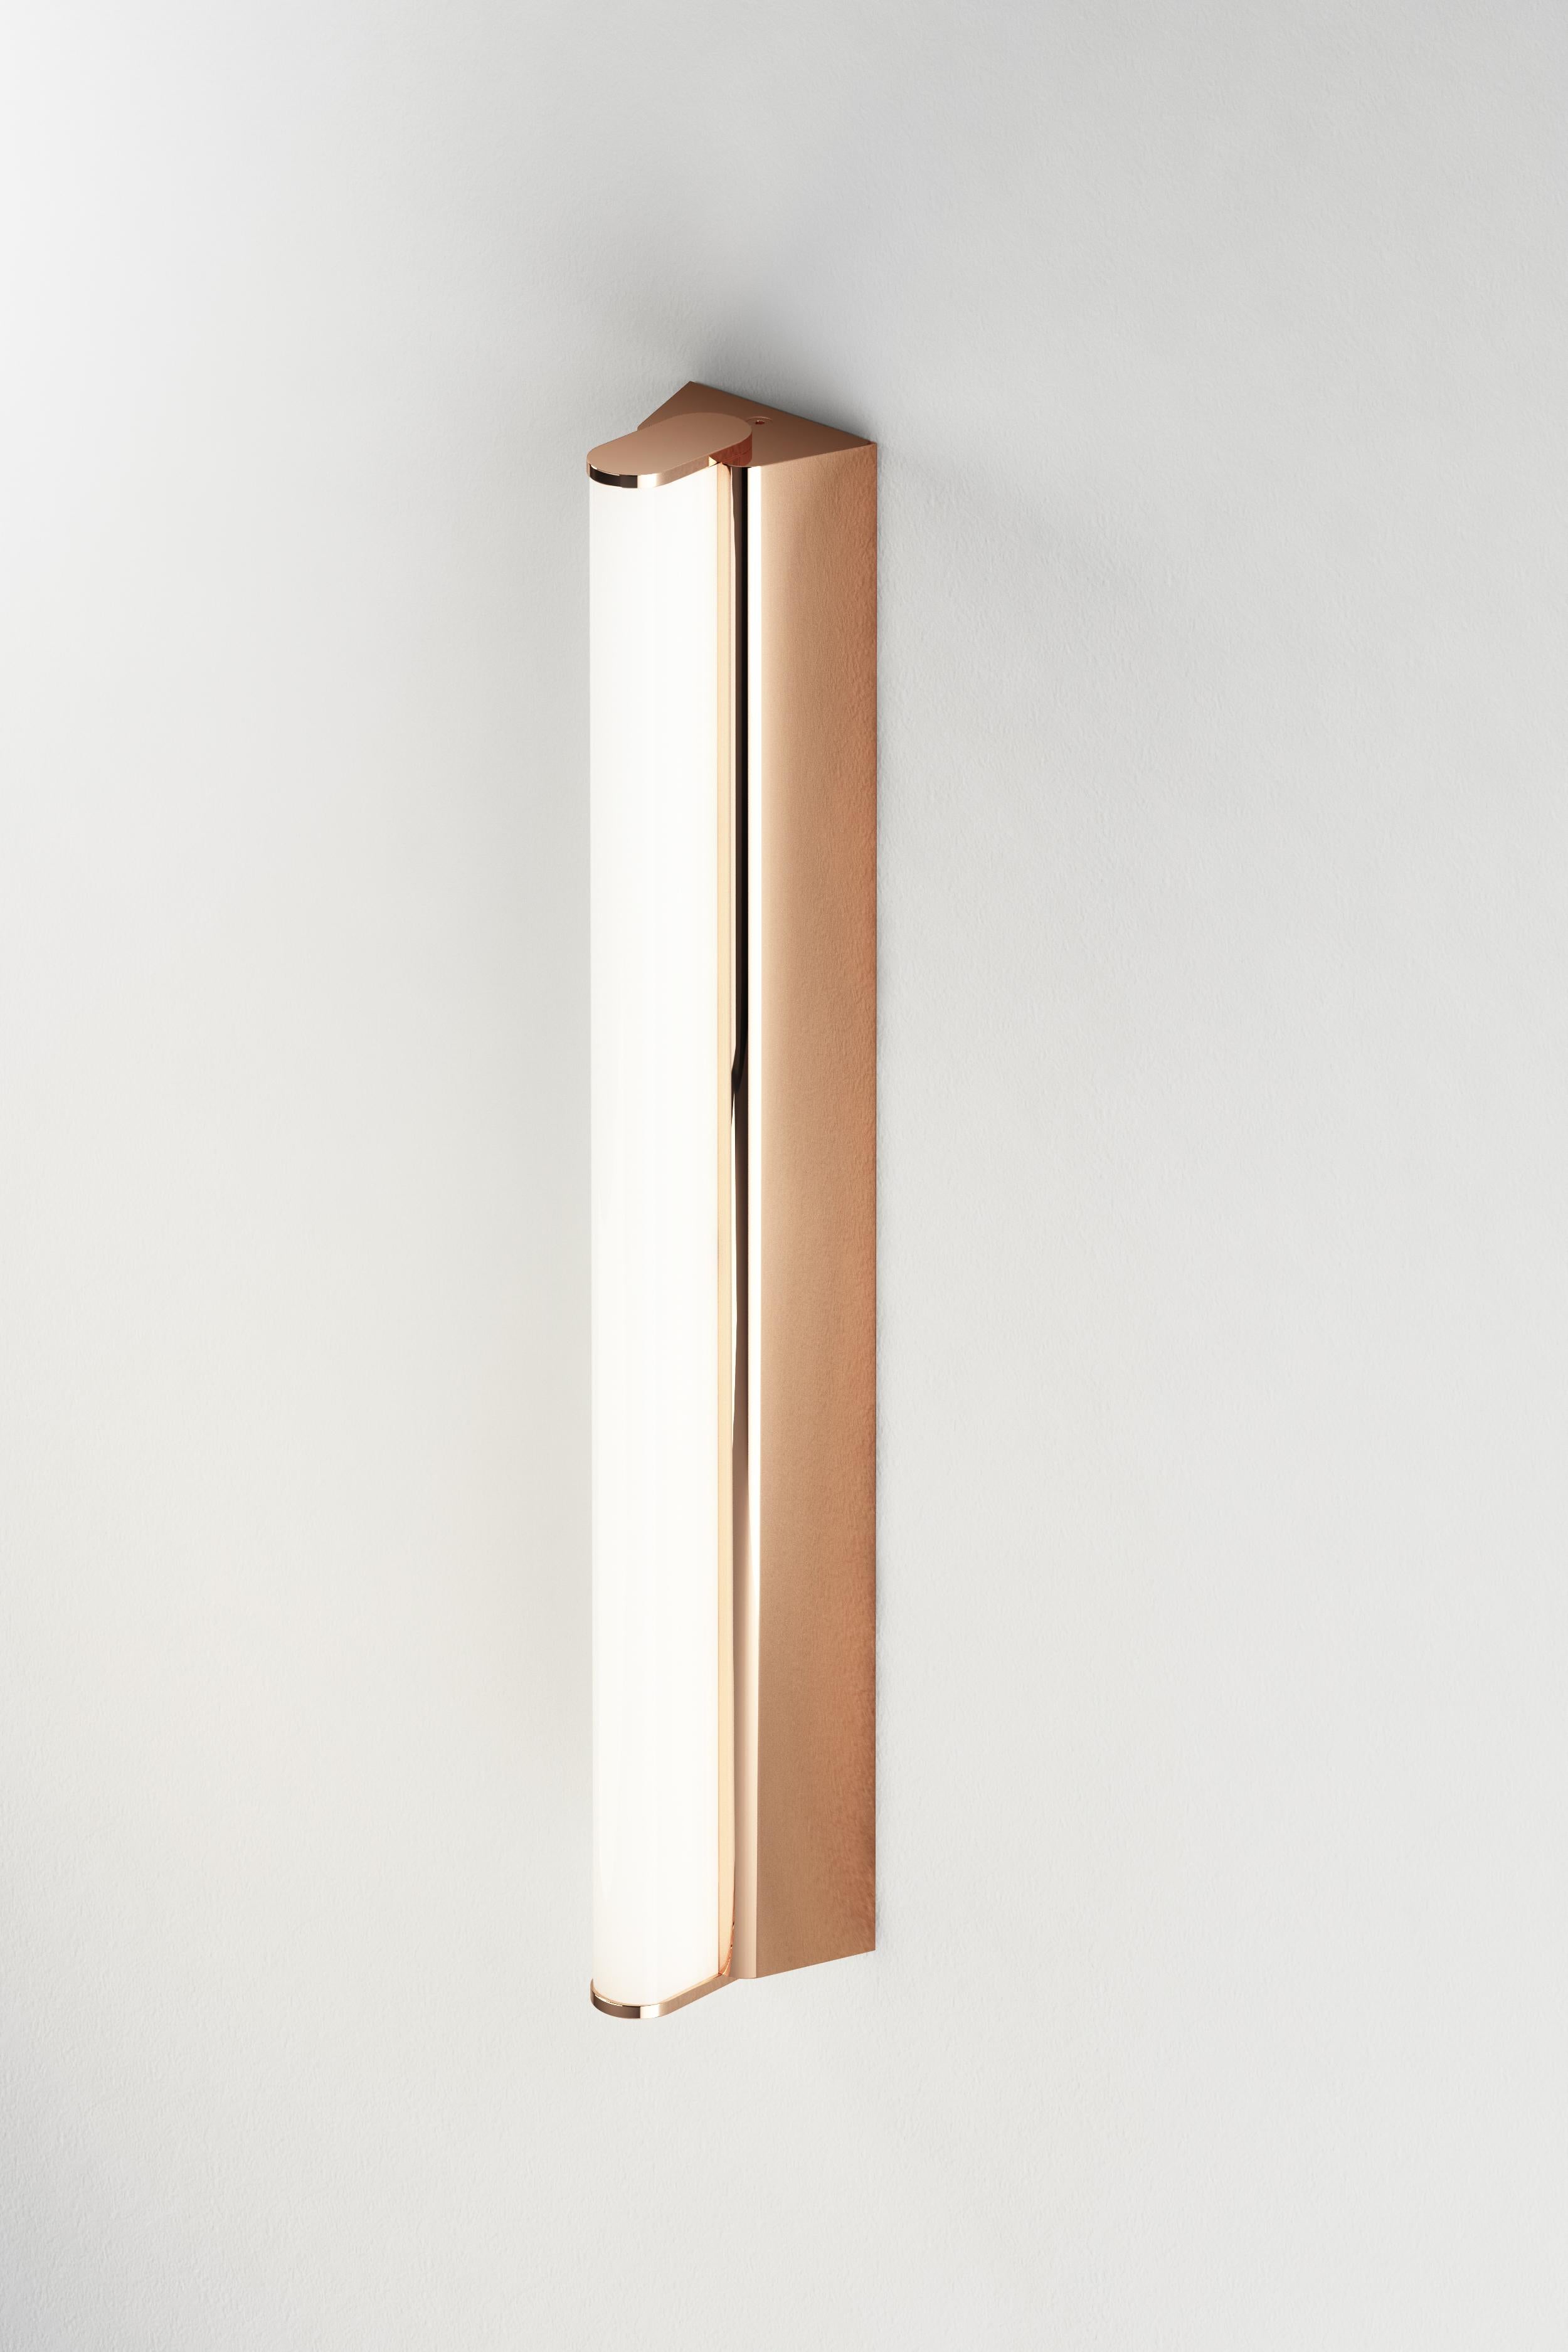 Post-Modern IP Metrop 325 Polished Graphite Wall Light by Emilie Cathelineau For Sale